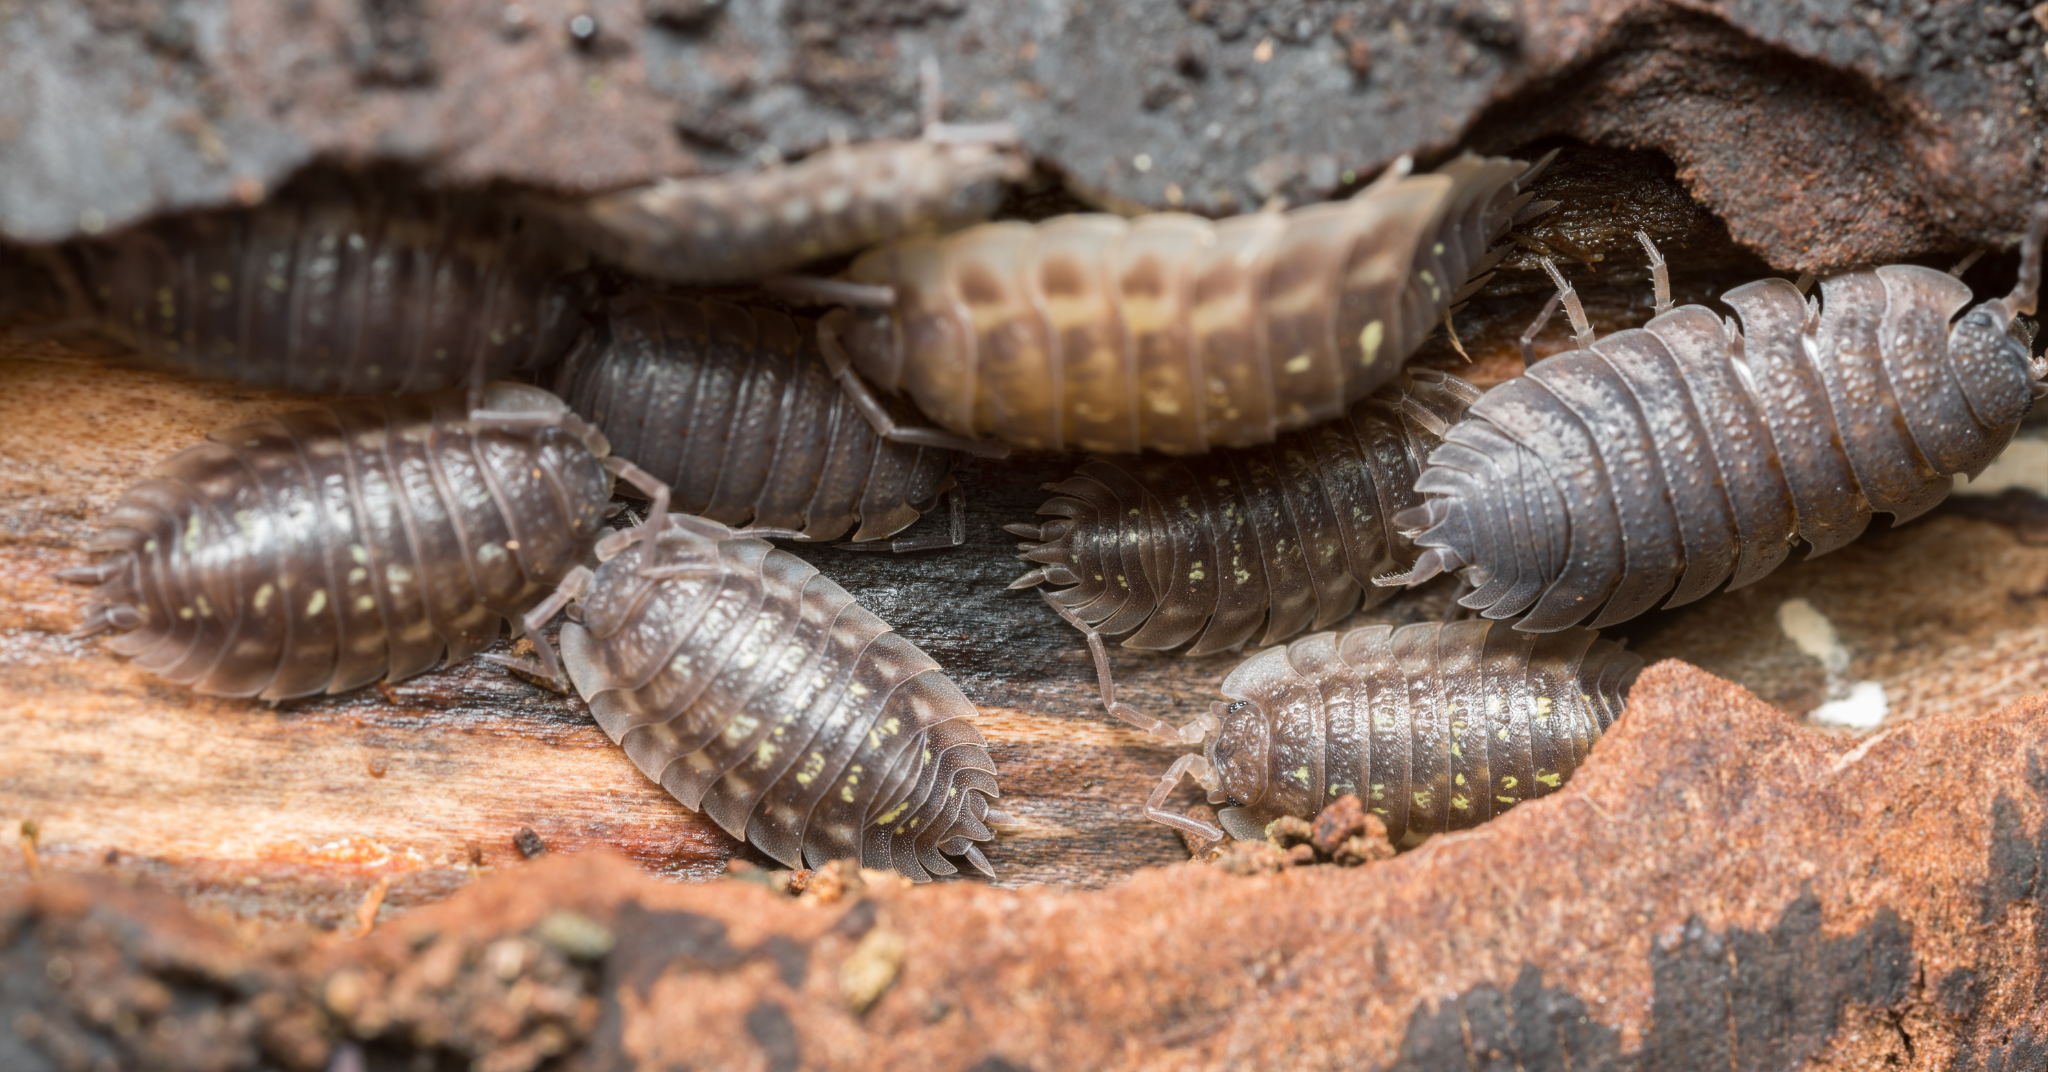 A Bug by Any Other Name: Pill Bugs, Roly-Polies, and Doodlebugs